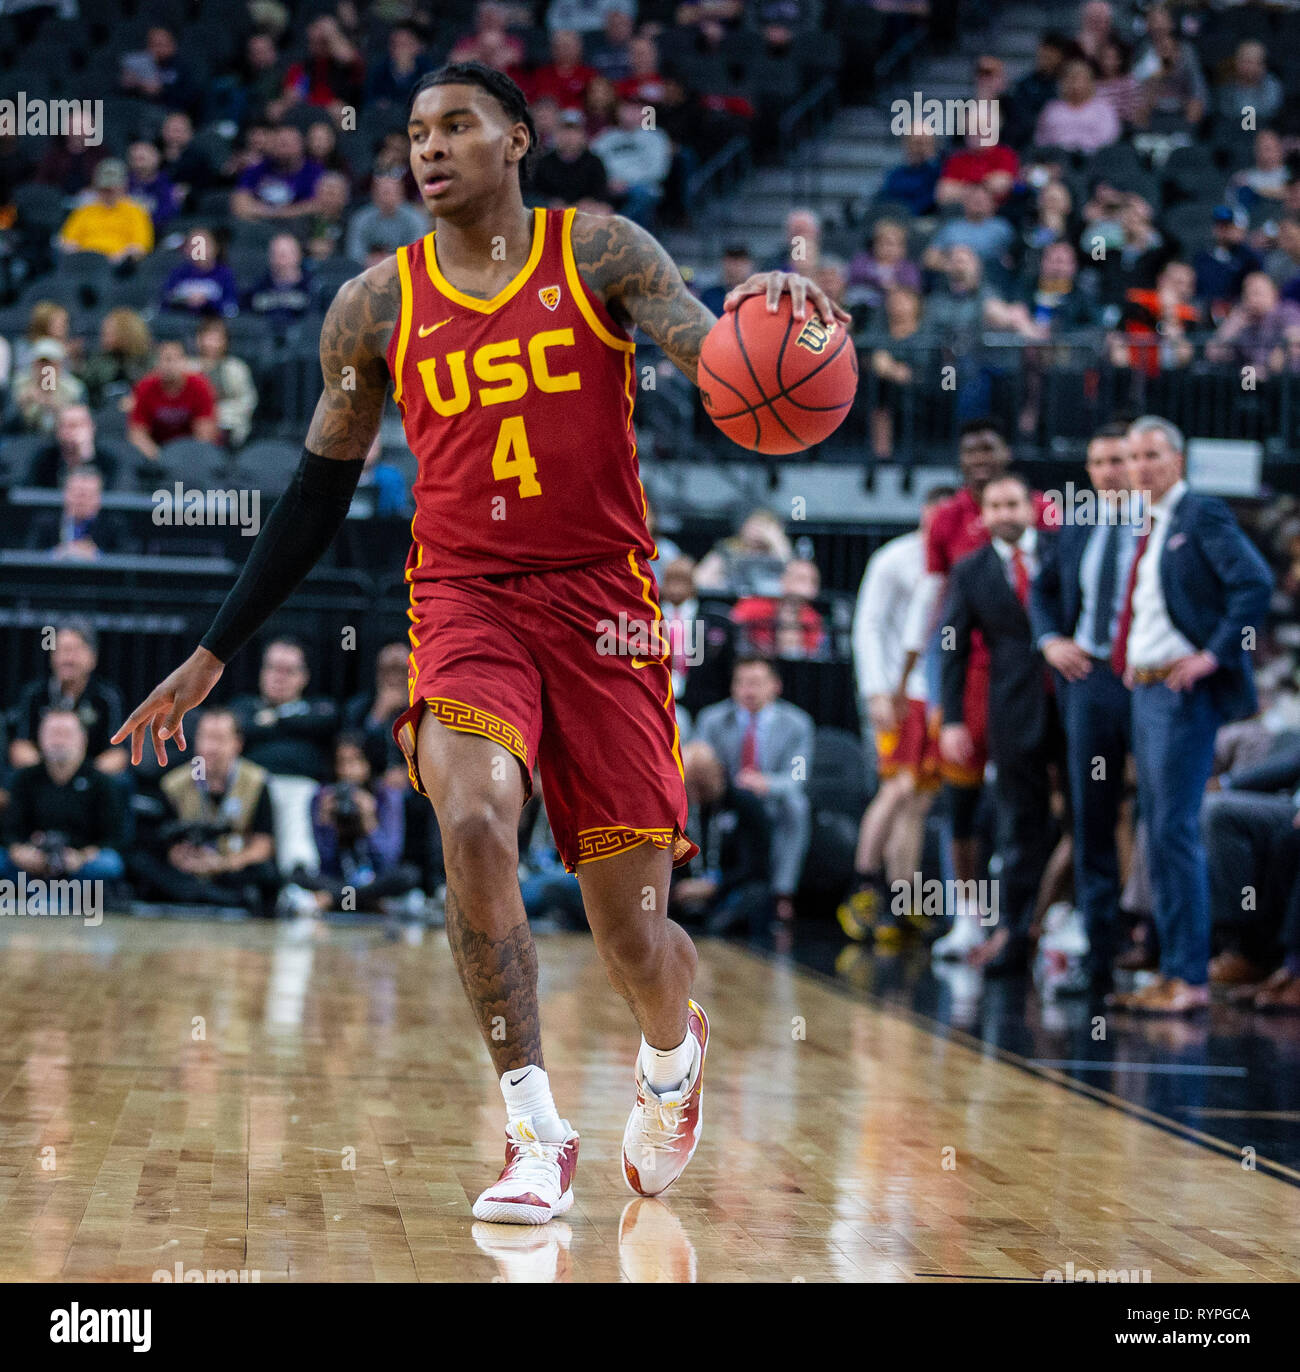 4,944 Kevin Porter Jr Photos & High Res Pictures - Getty Images